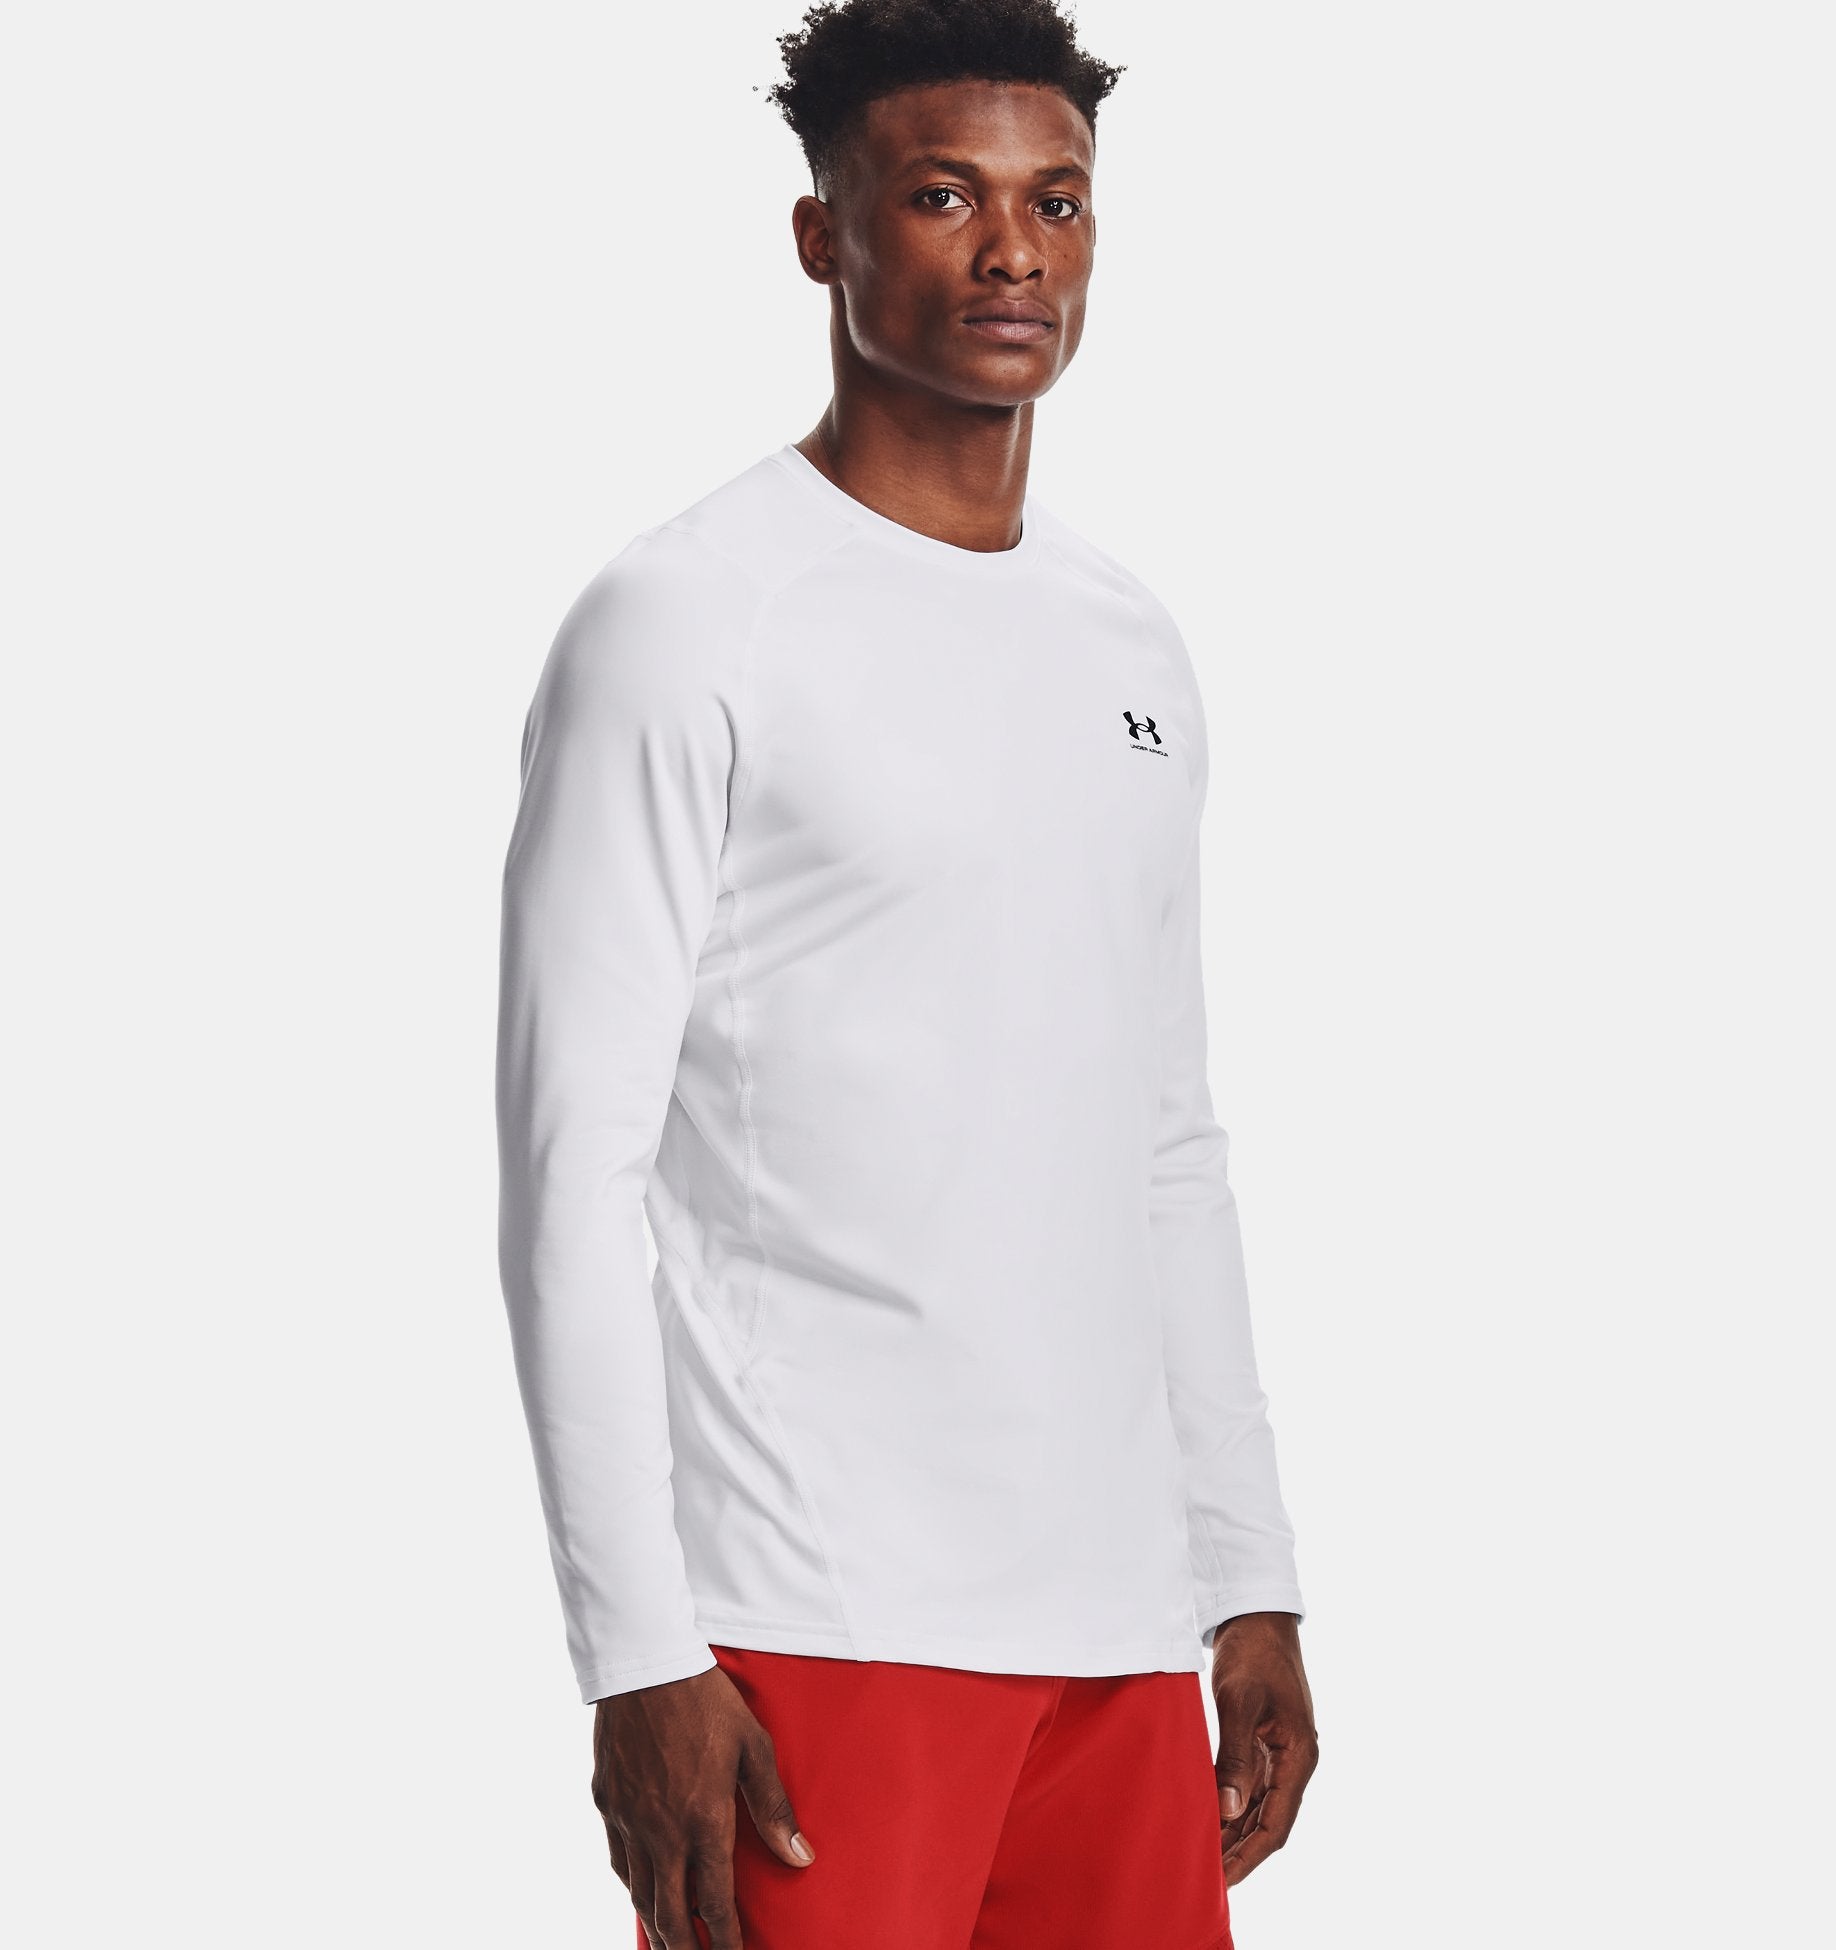 Under Armour Men's ColdGear Armour Fitted Crew Apparel Under Armour White/Black-100 Small 